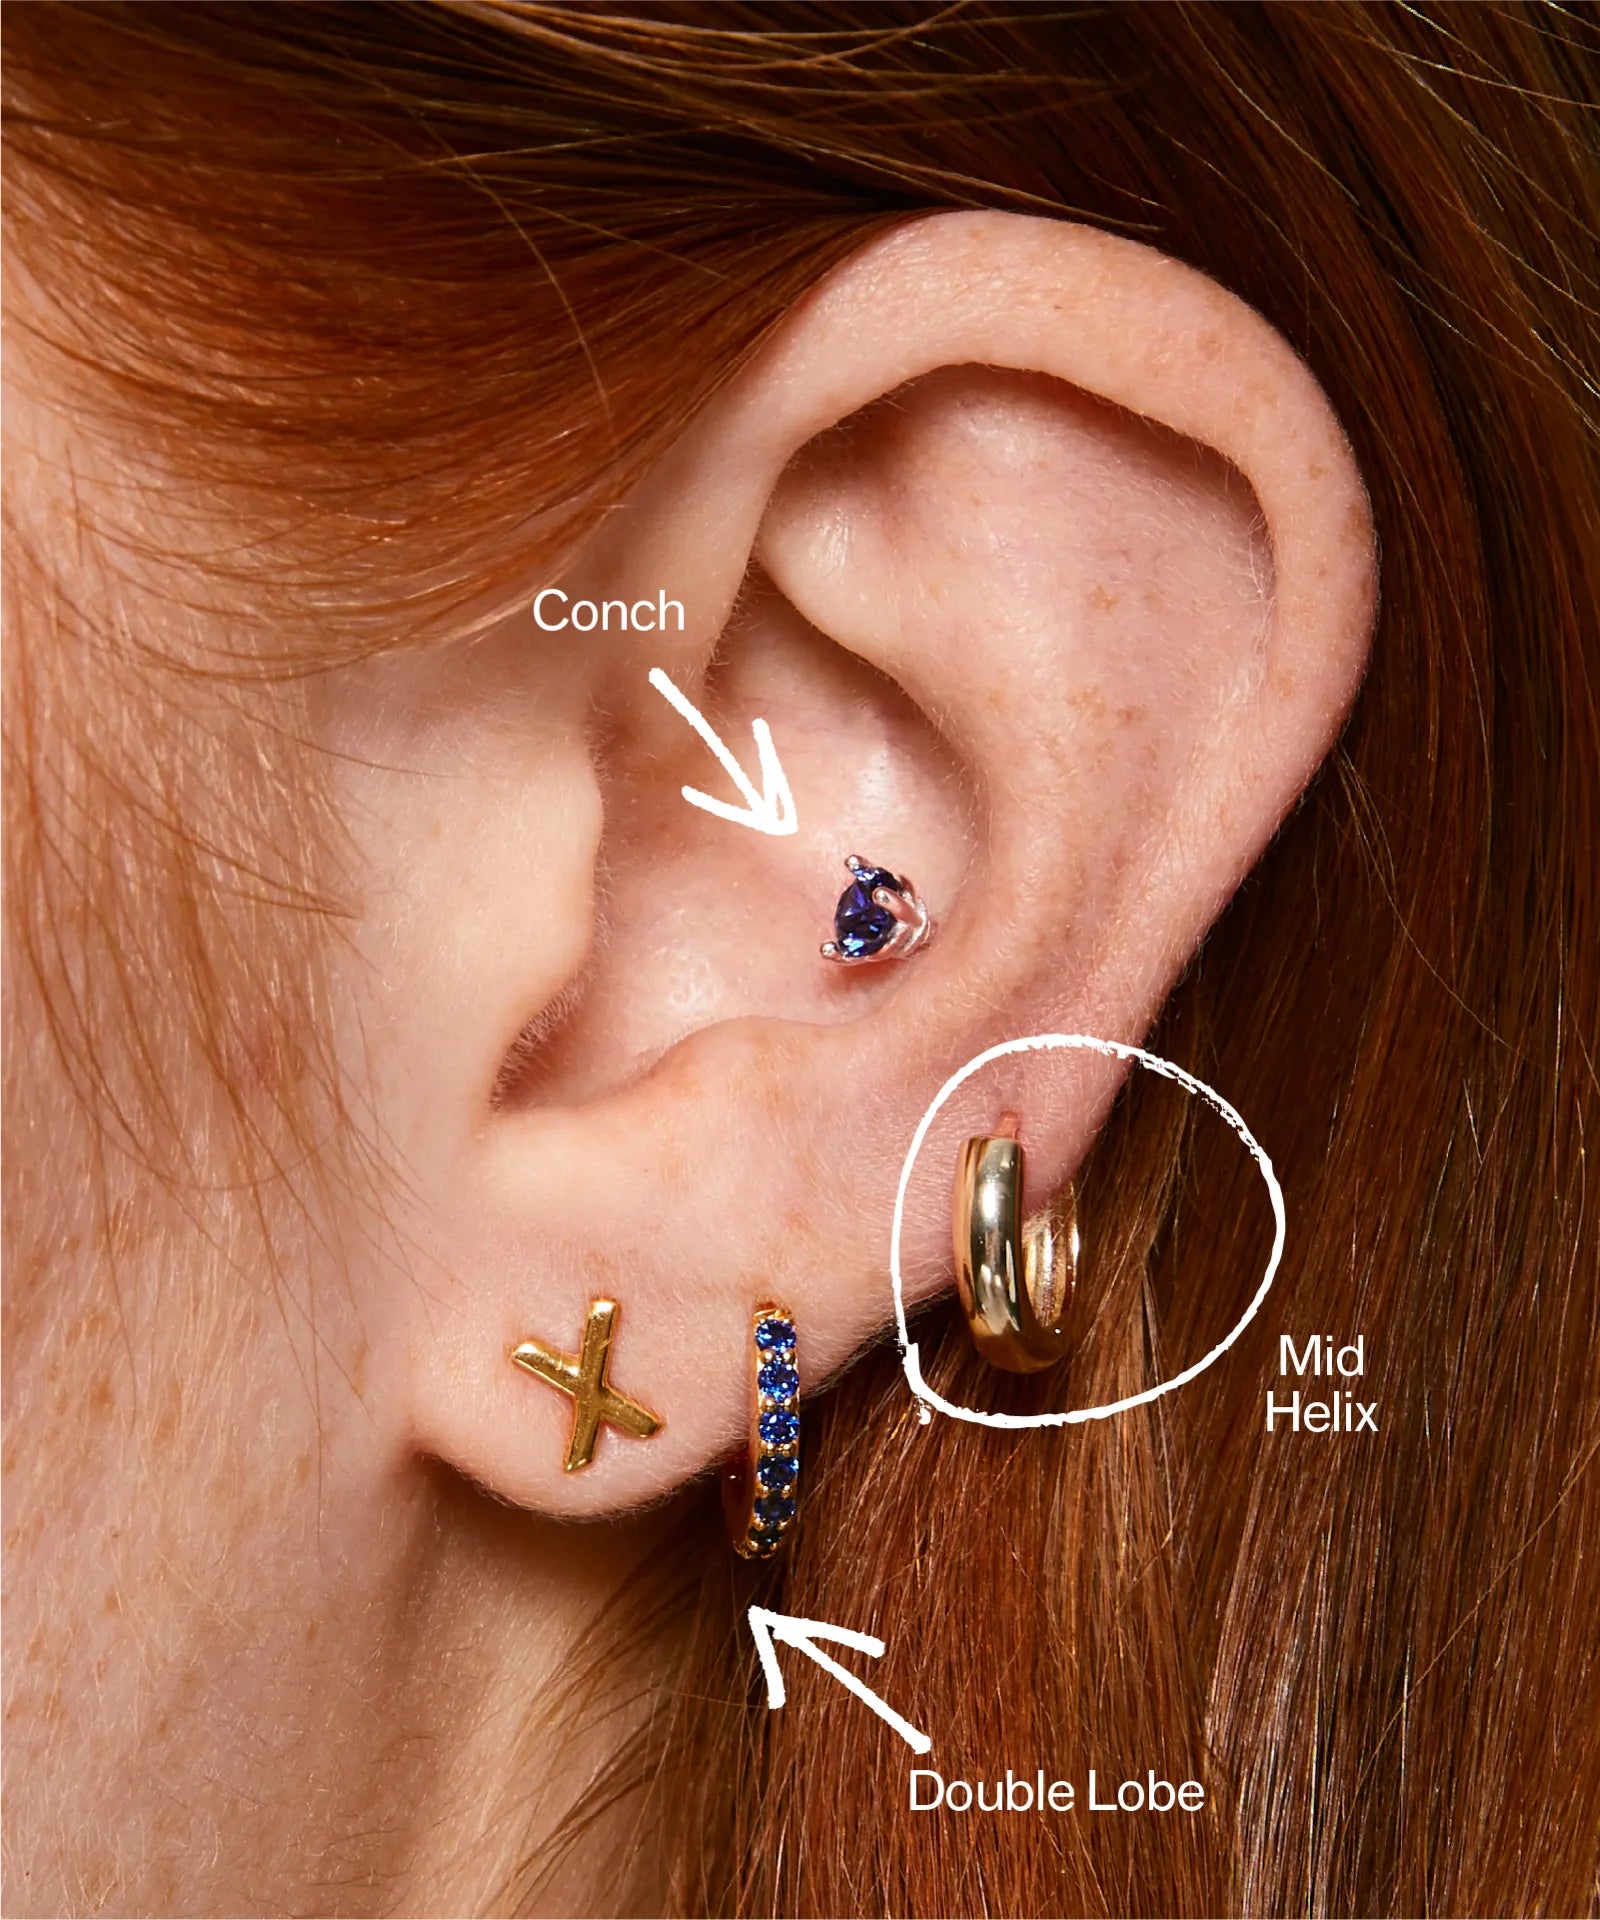 Conch Piercing and Jewelry Types to Go With It – Blingvine